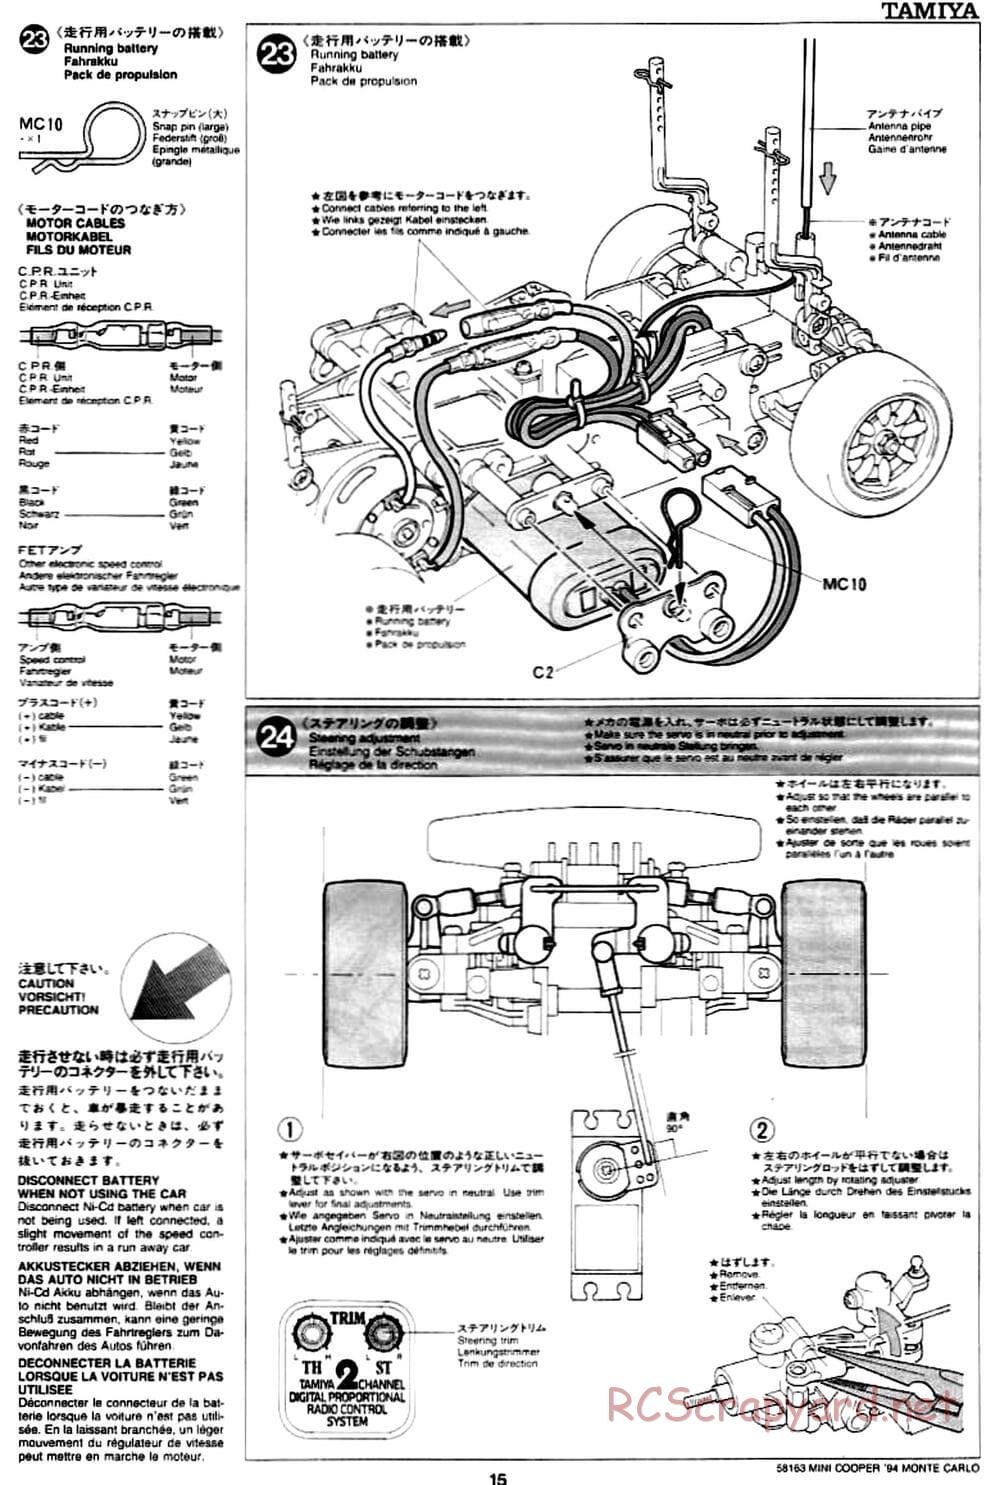 Tamiya - Rover Mini Cooper 94 Monte-Carlo - M01 Chassis - Manual - Page 15